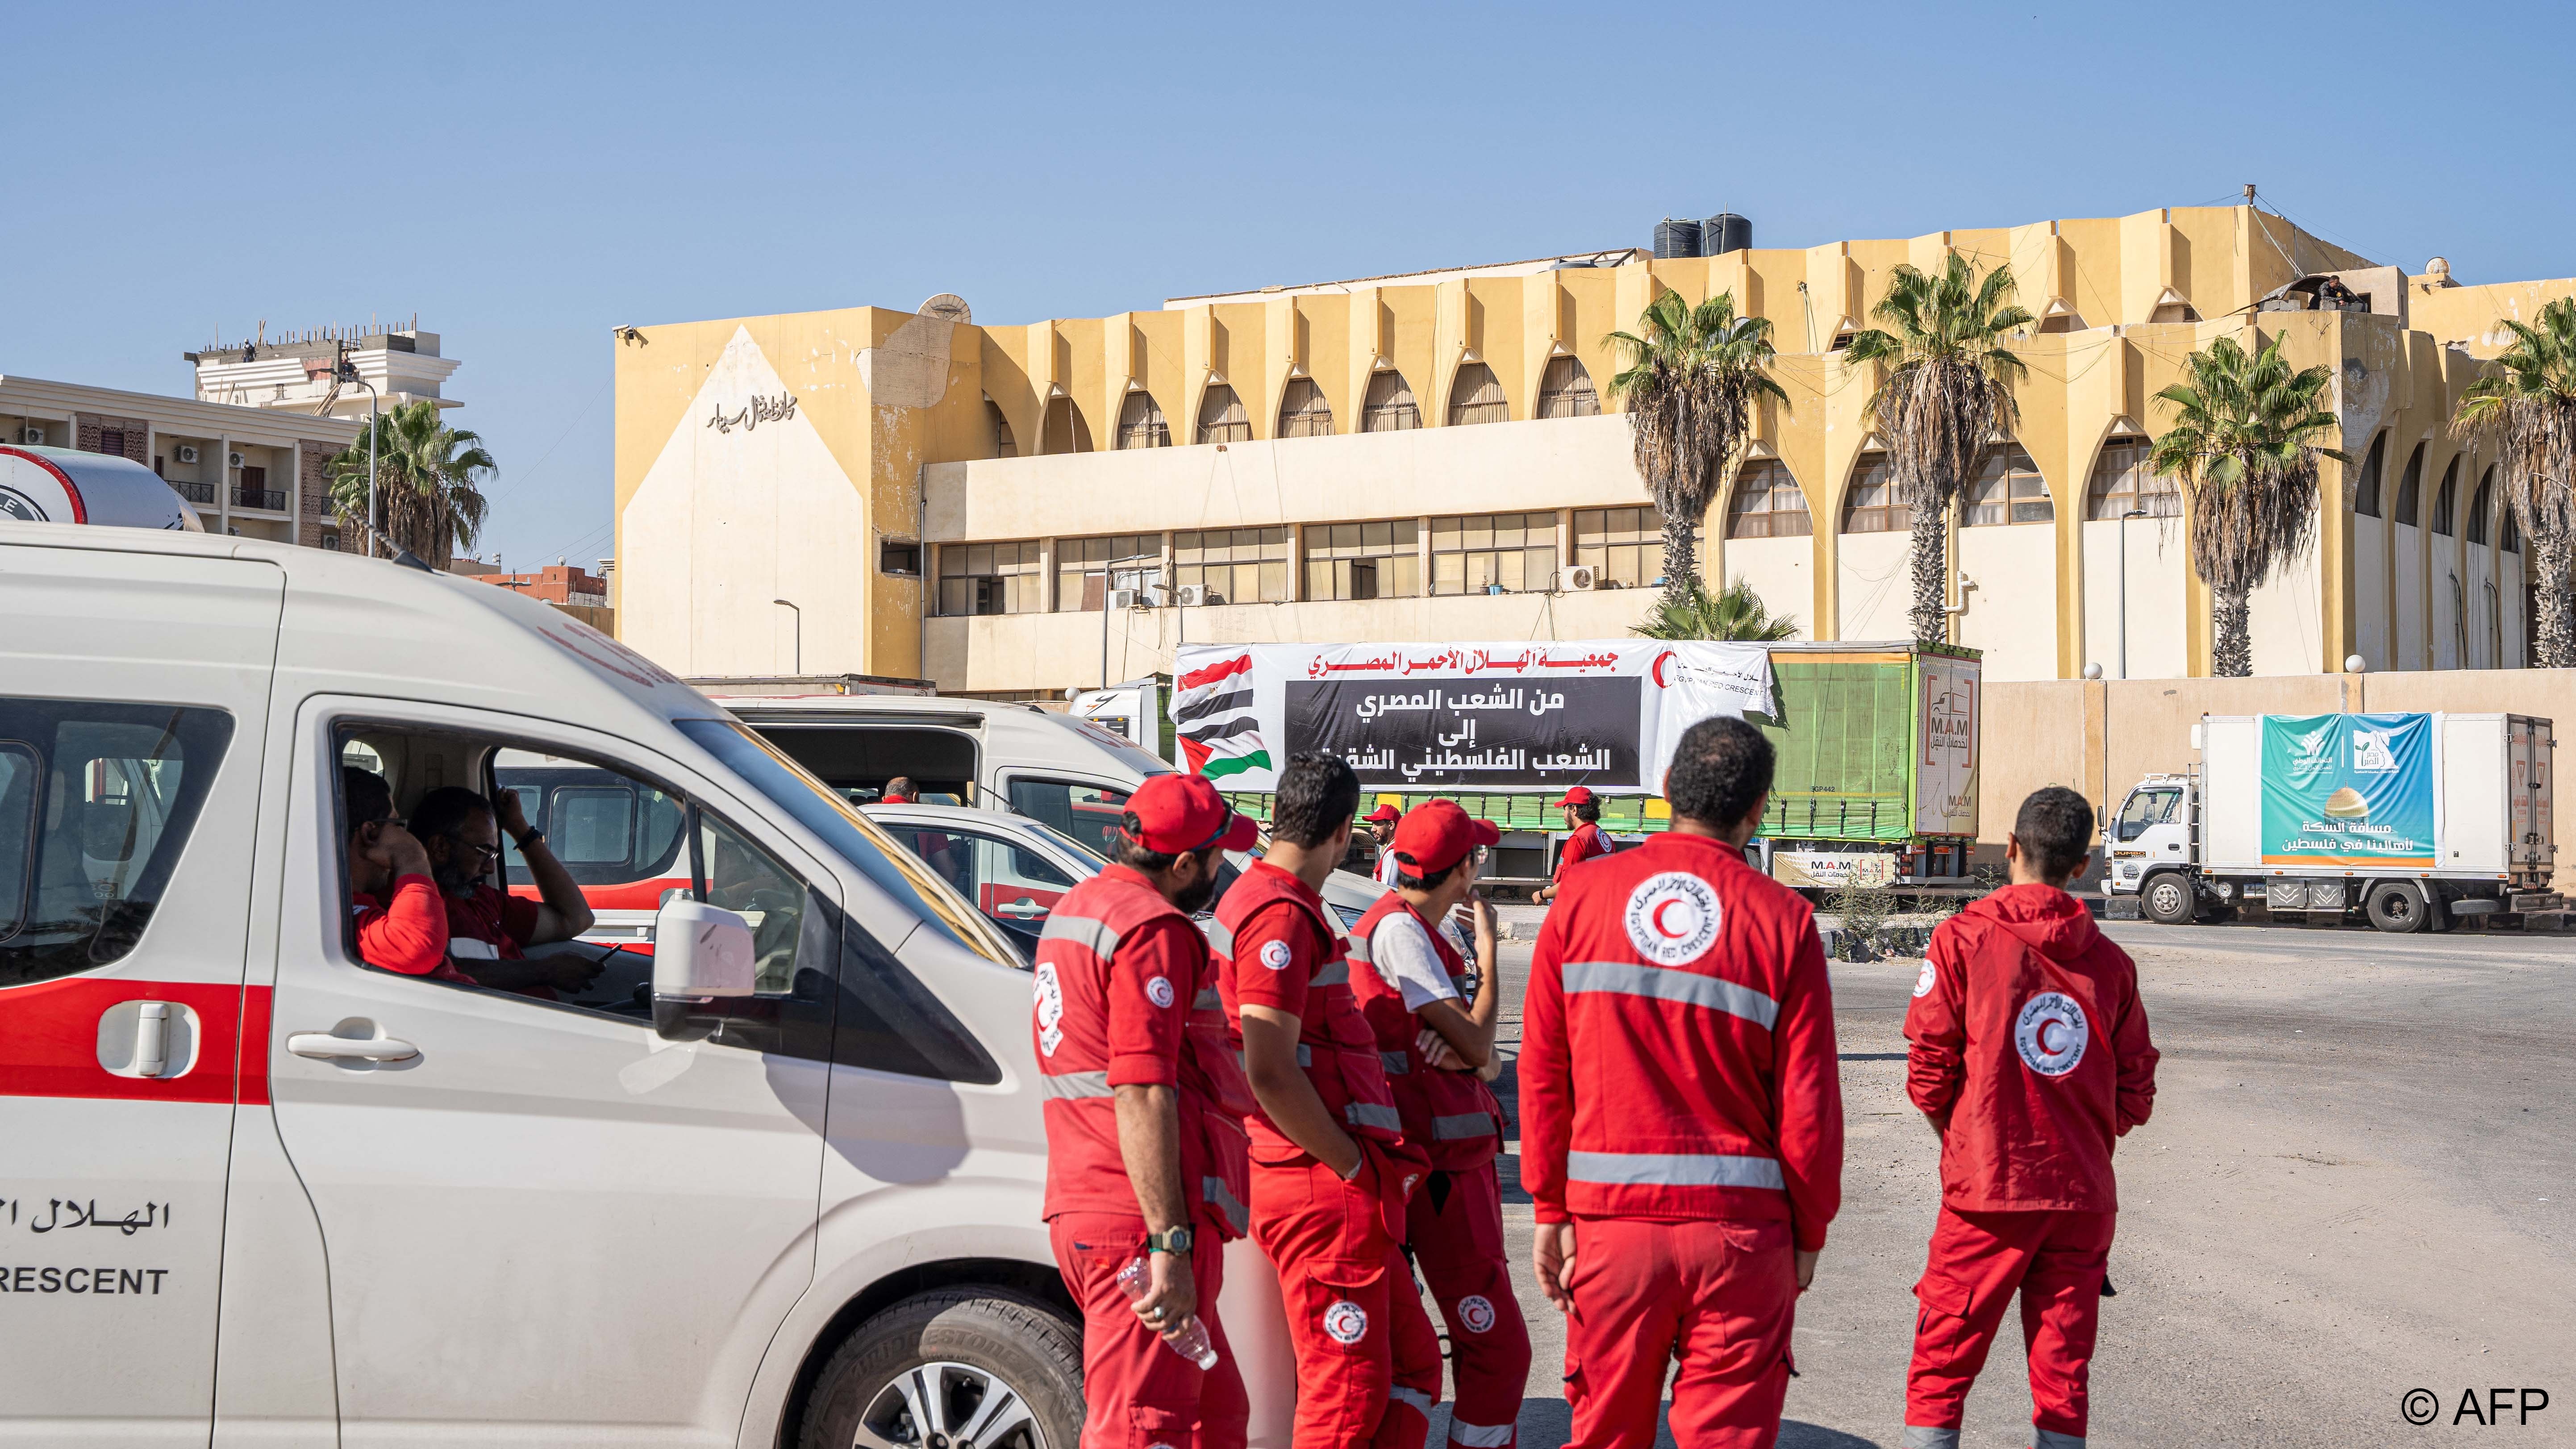 Medics and a convoy of trucks loaded with aid supplies for Gaza provided by Egyptian NGOs wait for an agreement to cross through the Egypt-Gaza border (image: Ali Moustafa / AFP)